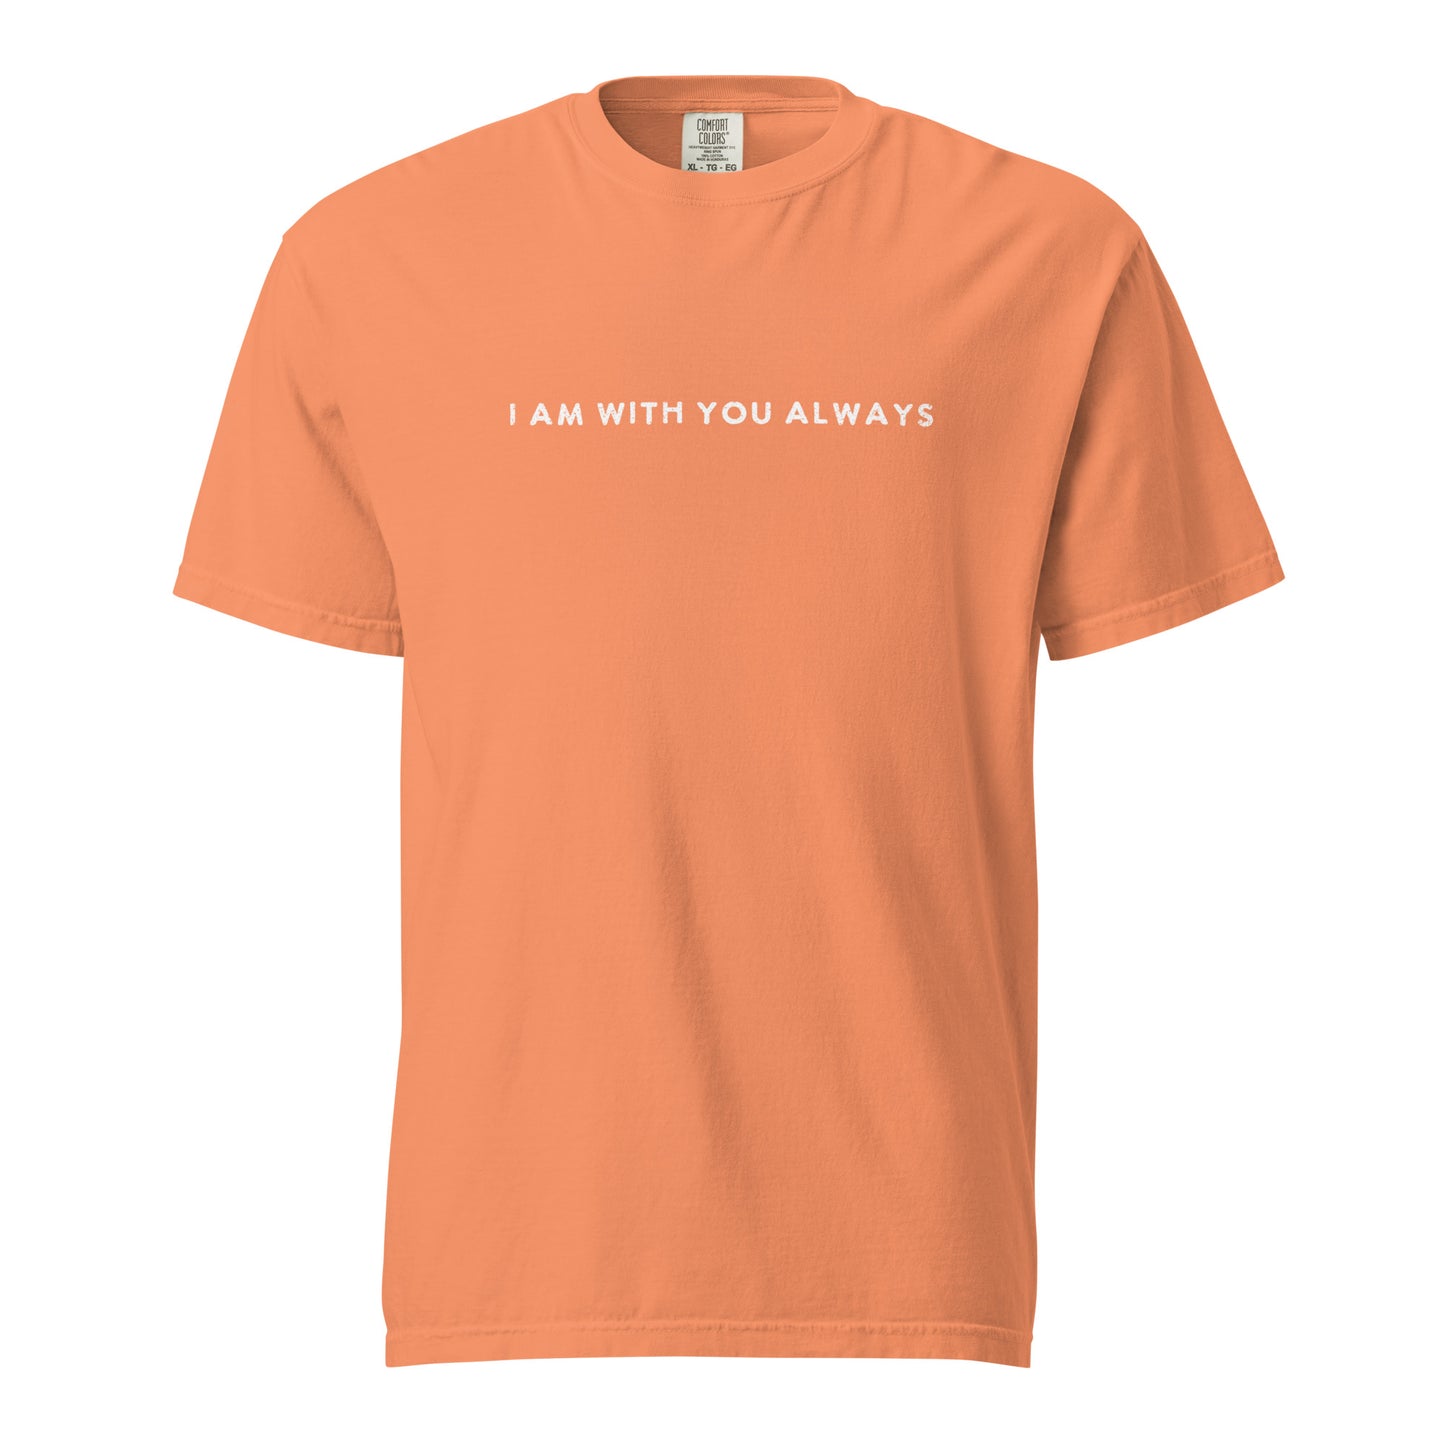 "I Am With You Always" Comfort Colors Unisex T-Shirt